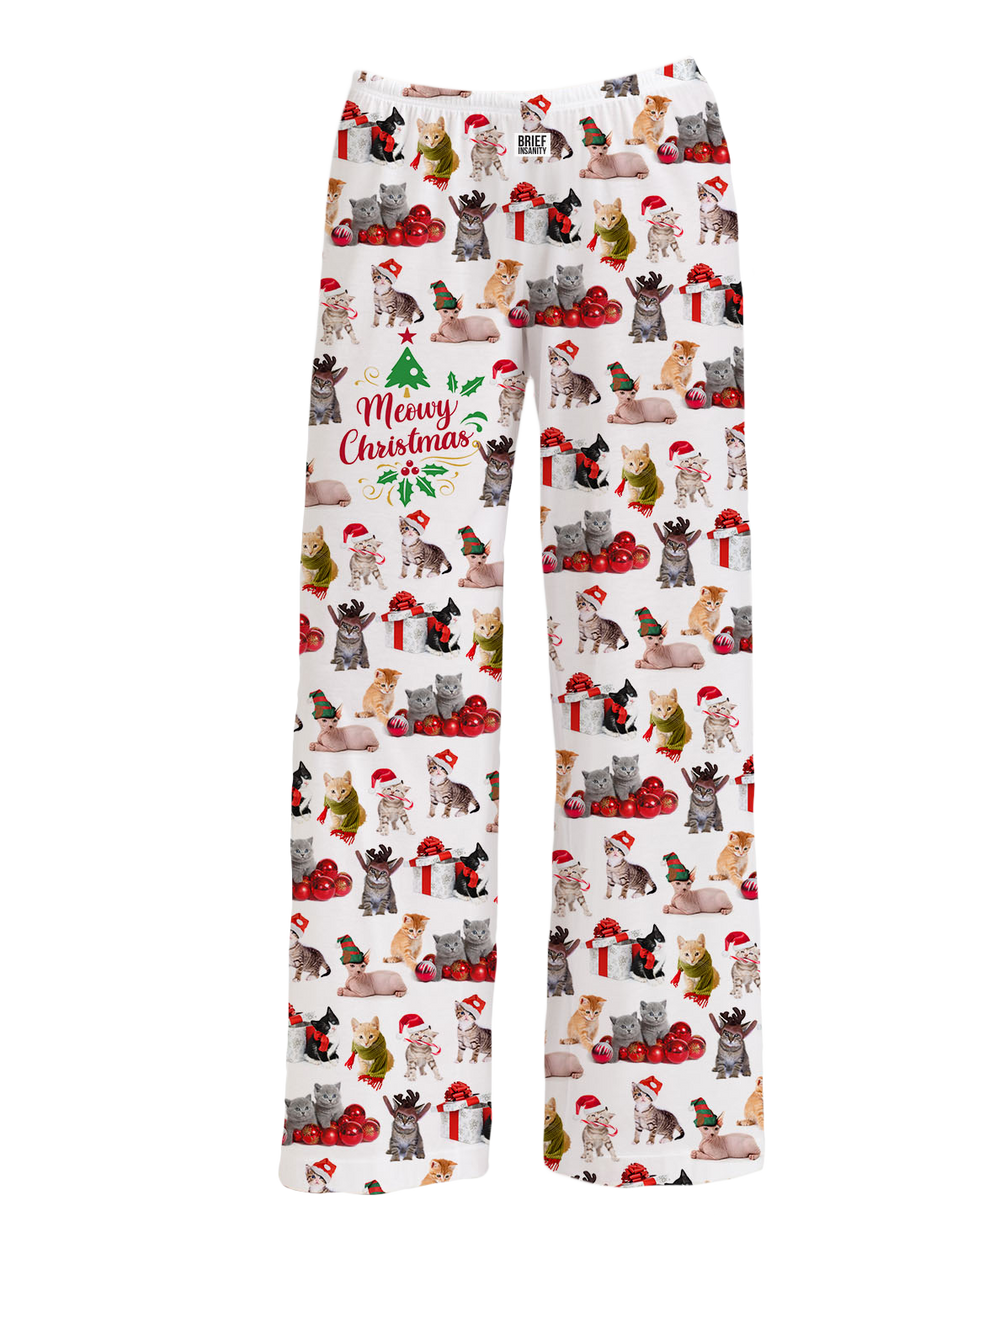 Dale's Exclusive Meowy Christmas Lounge Pants